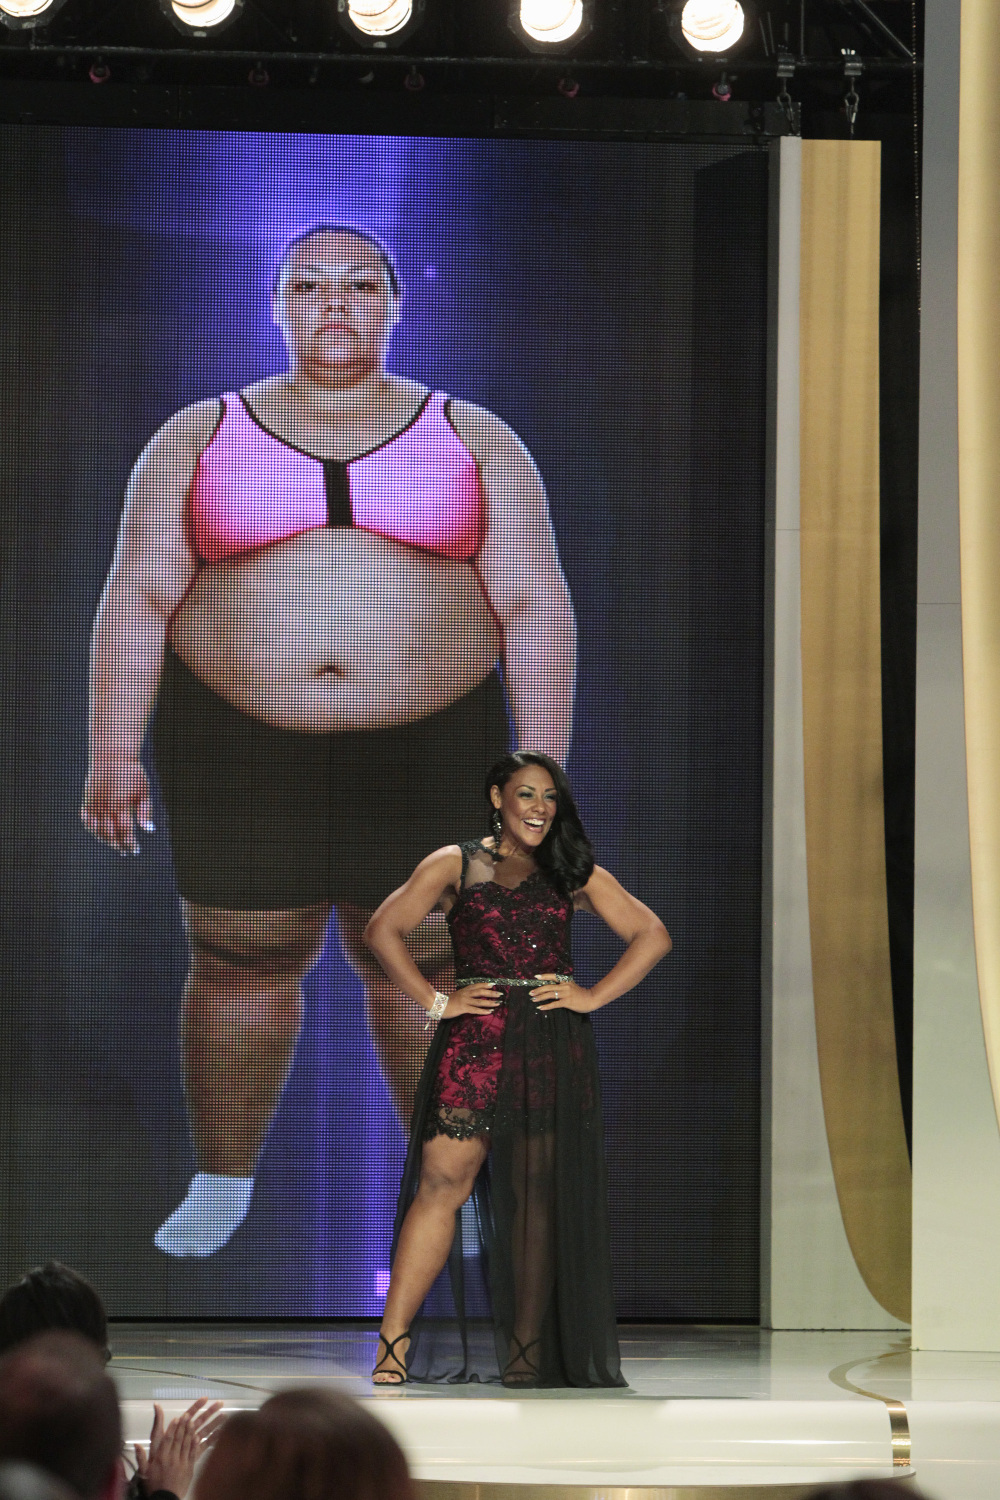 Extreme Weight Loss: Kim's Incredible Transformation!